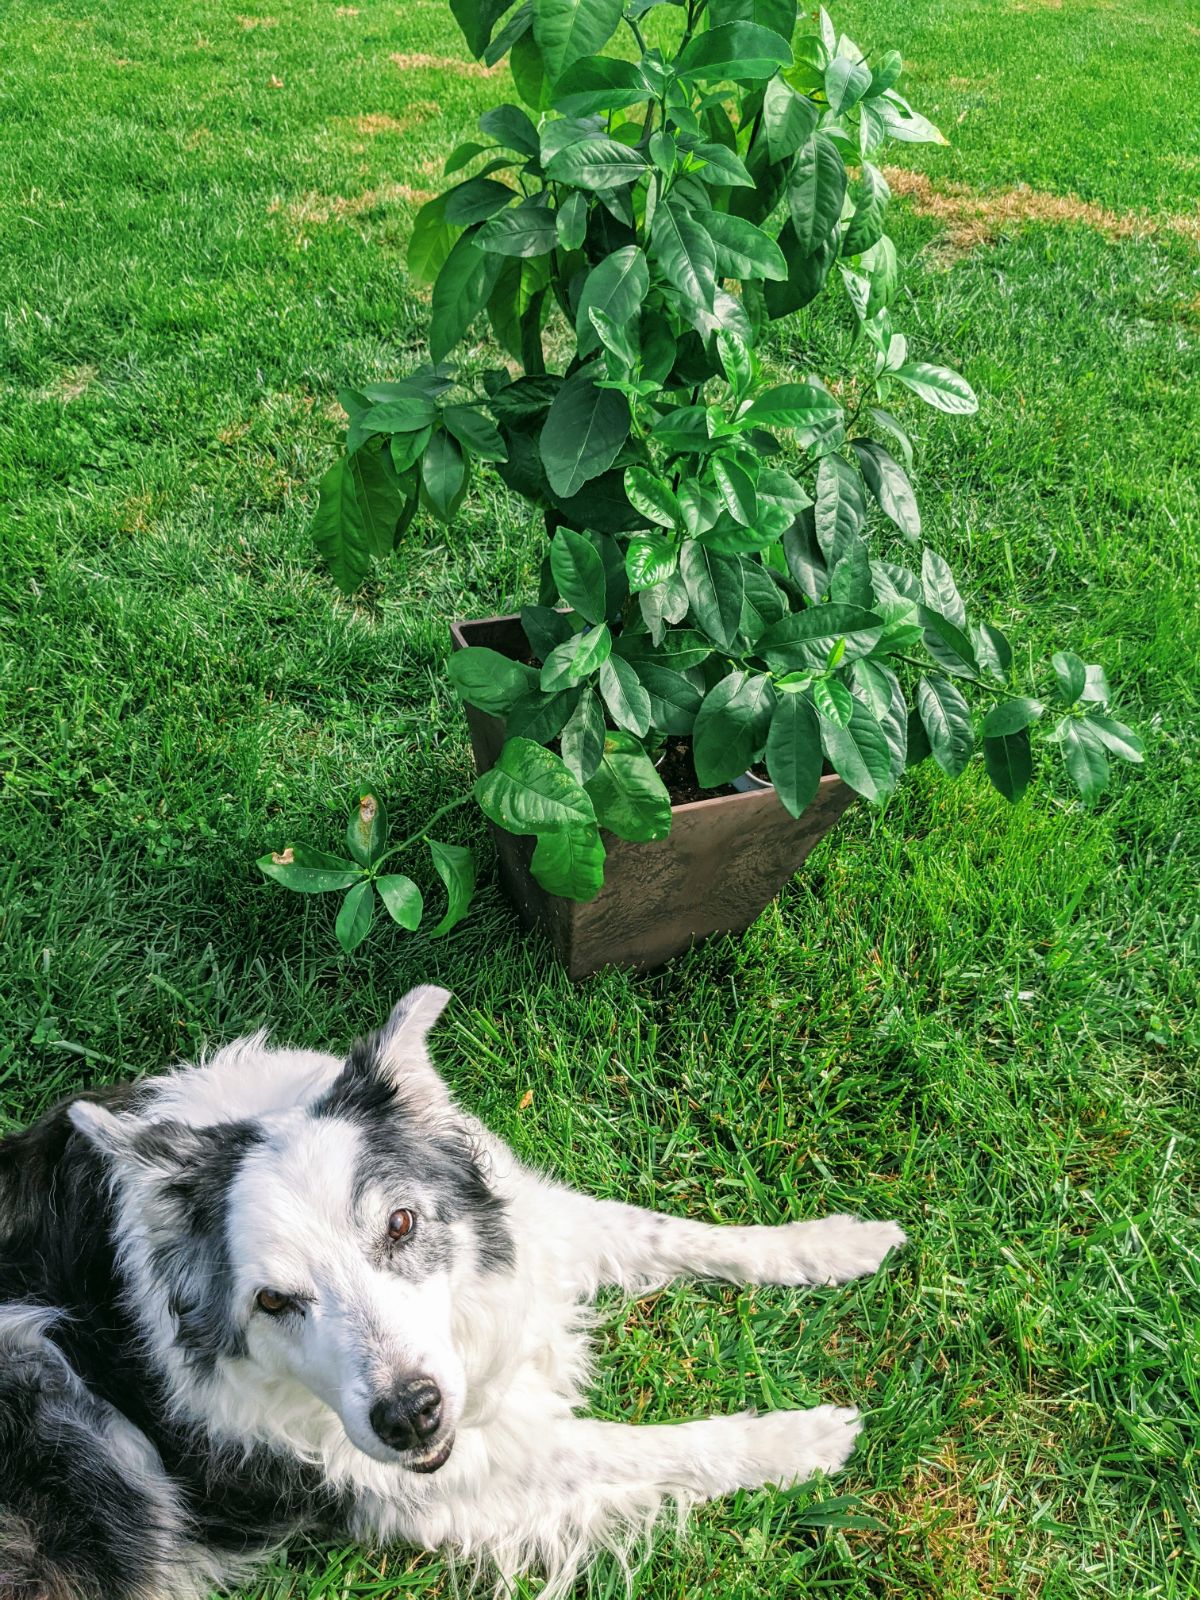 Cute Border Collie sunning herself next to a homegrown lemon tree planted from seed